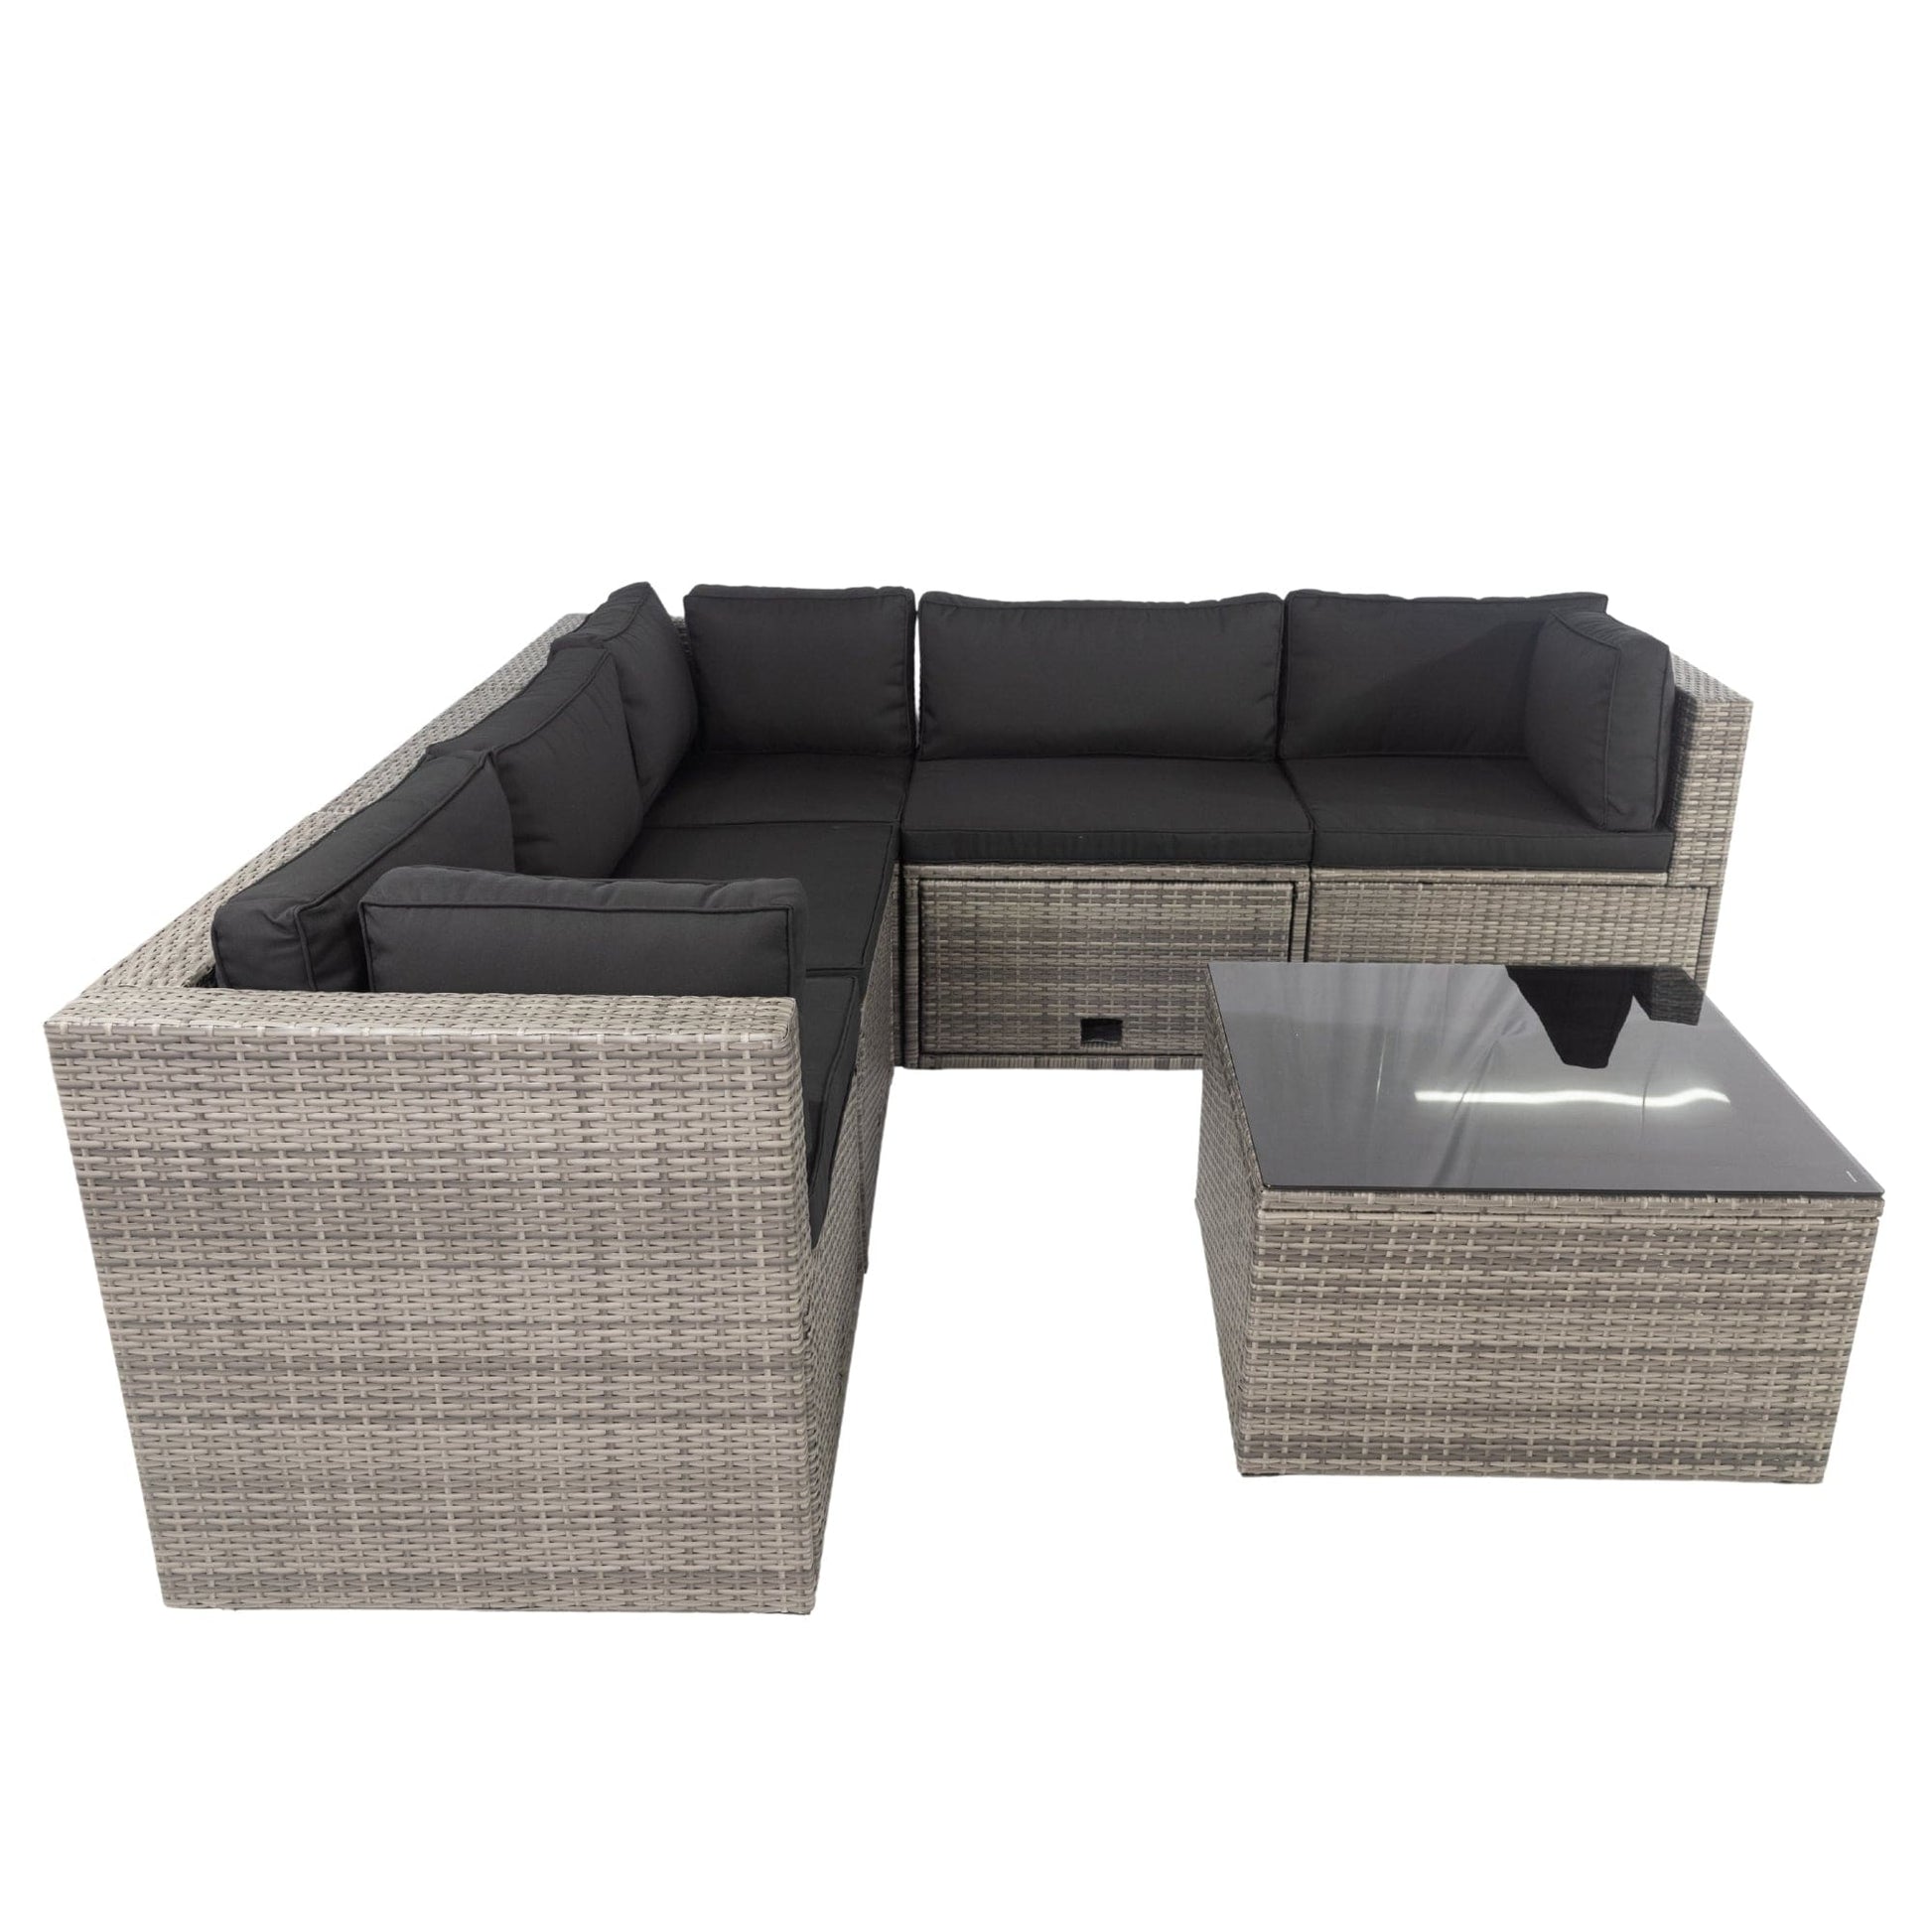 1st Choice Furniture Direct Sectional Sofa Units 1st Choice Sectional Cushioned Sofa Set with 3 Storage Under Seat